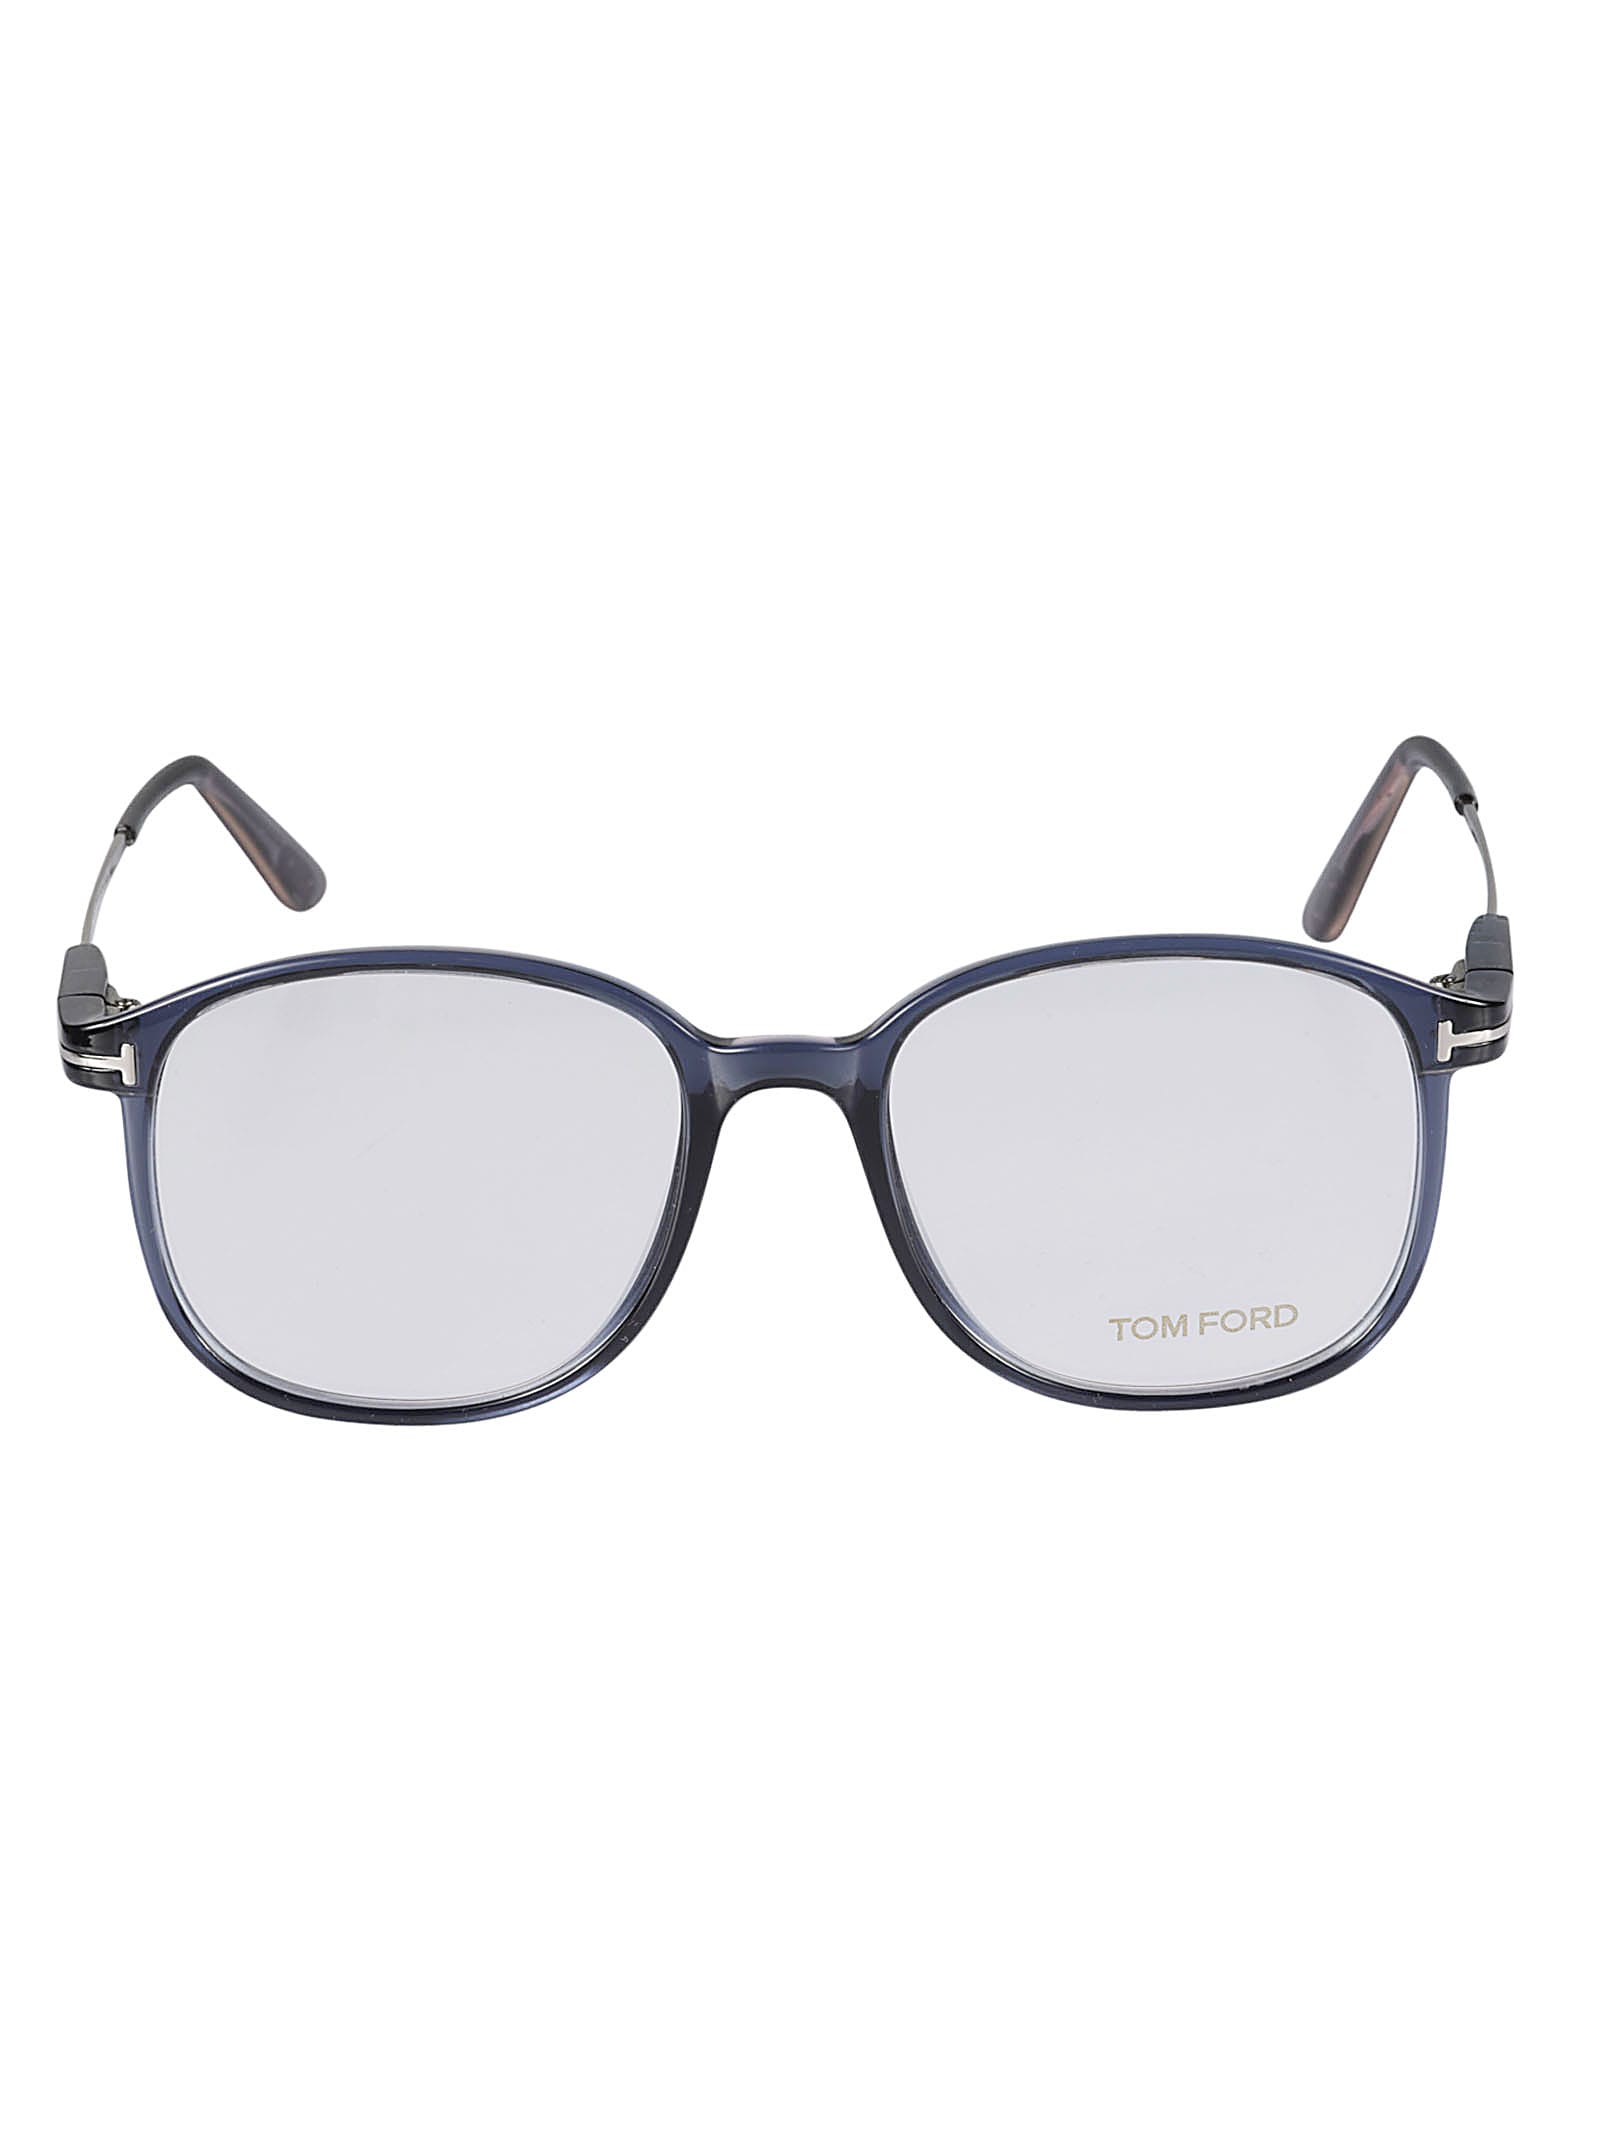 Tom Ford Round Clear Lens Glasses In Nero